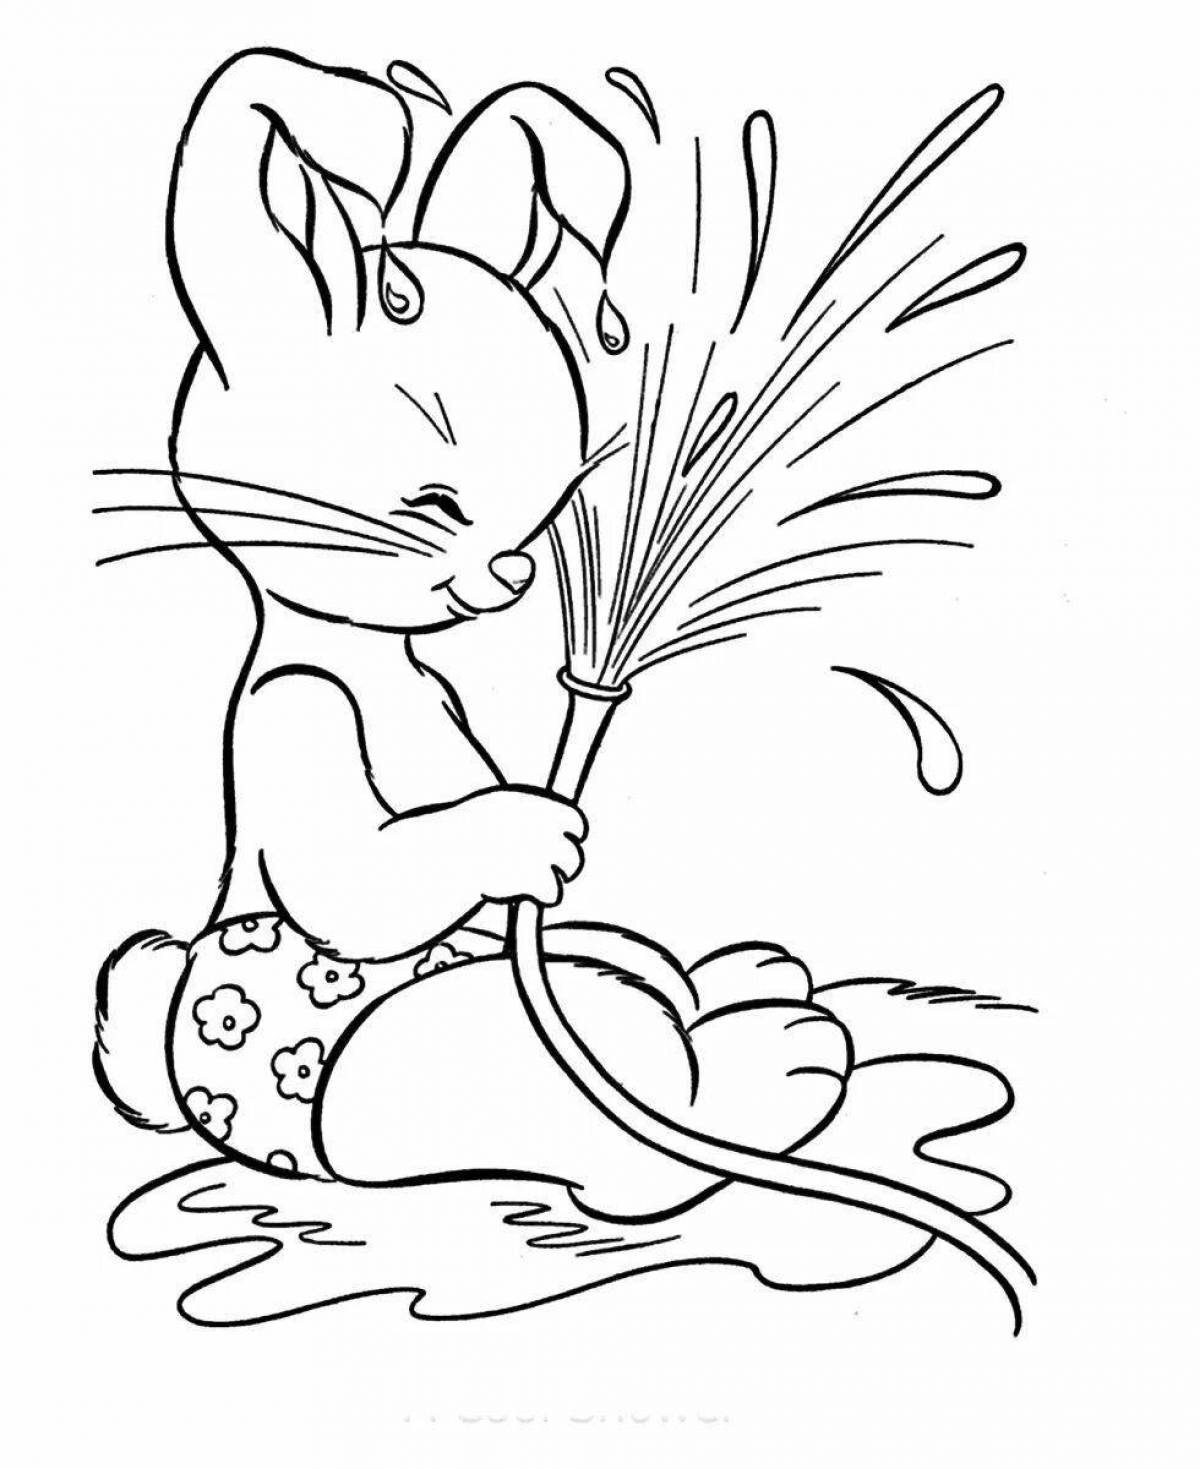 Coloring page adorable cat and rabbit